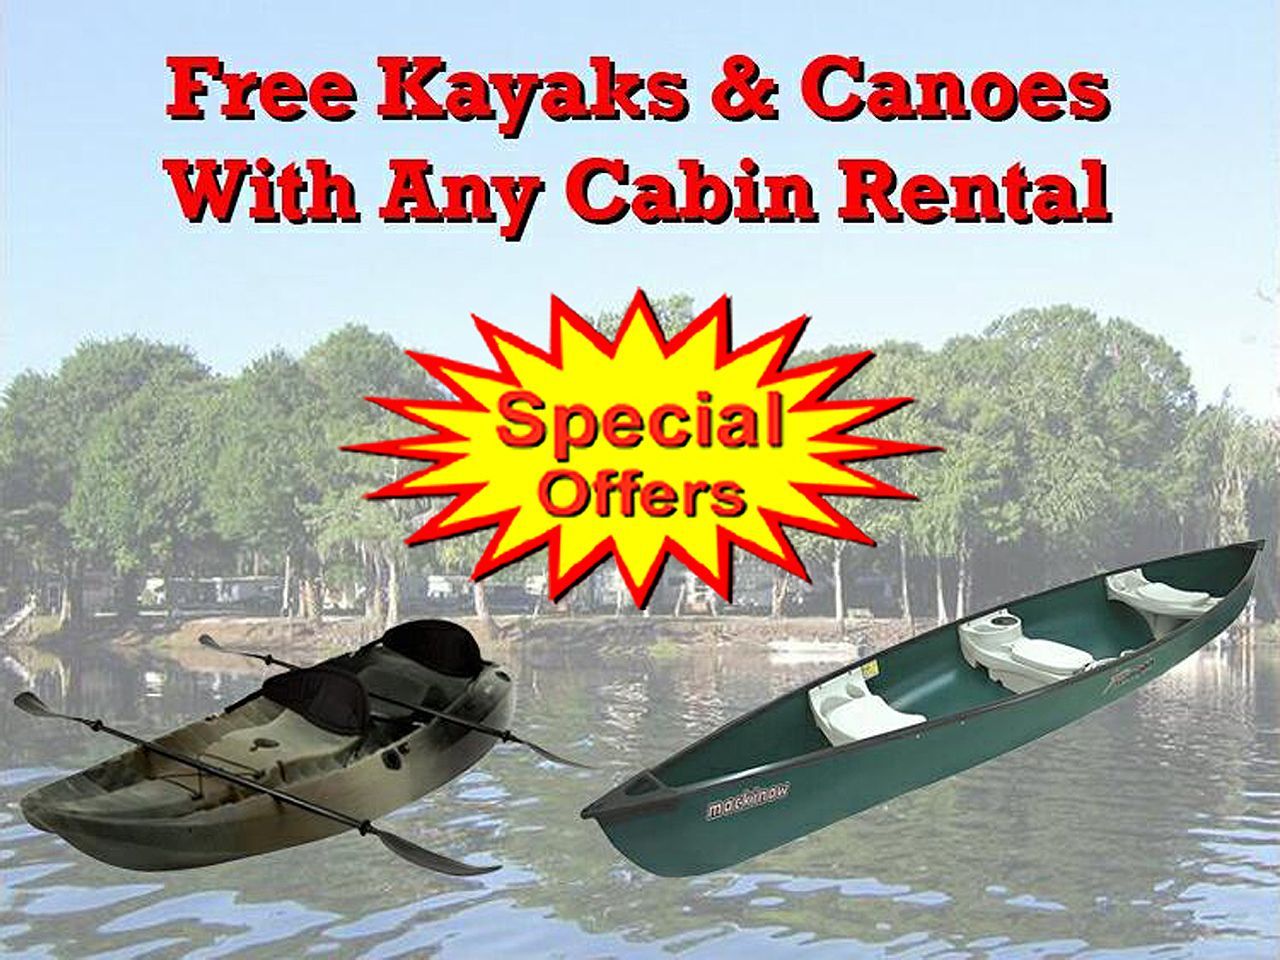 an advertisement for free kayaks and canoes with any cabin rental